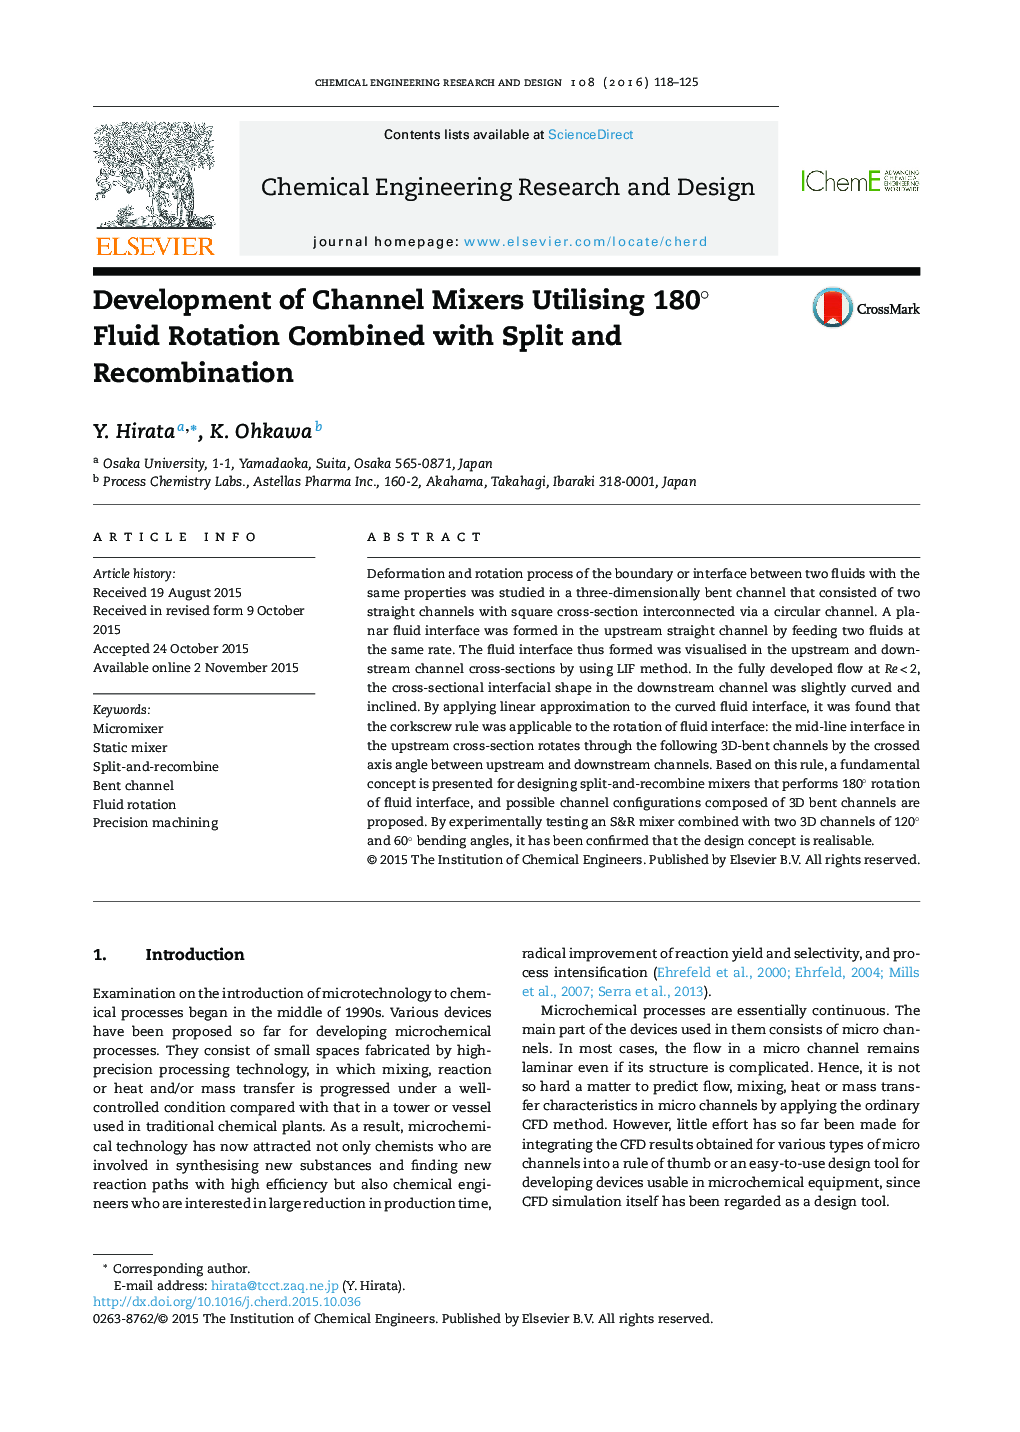 Development of Channel Mixers Utilising 180Â° Fluid Rotation Combined with Split and Recombination